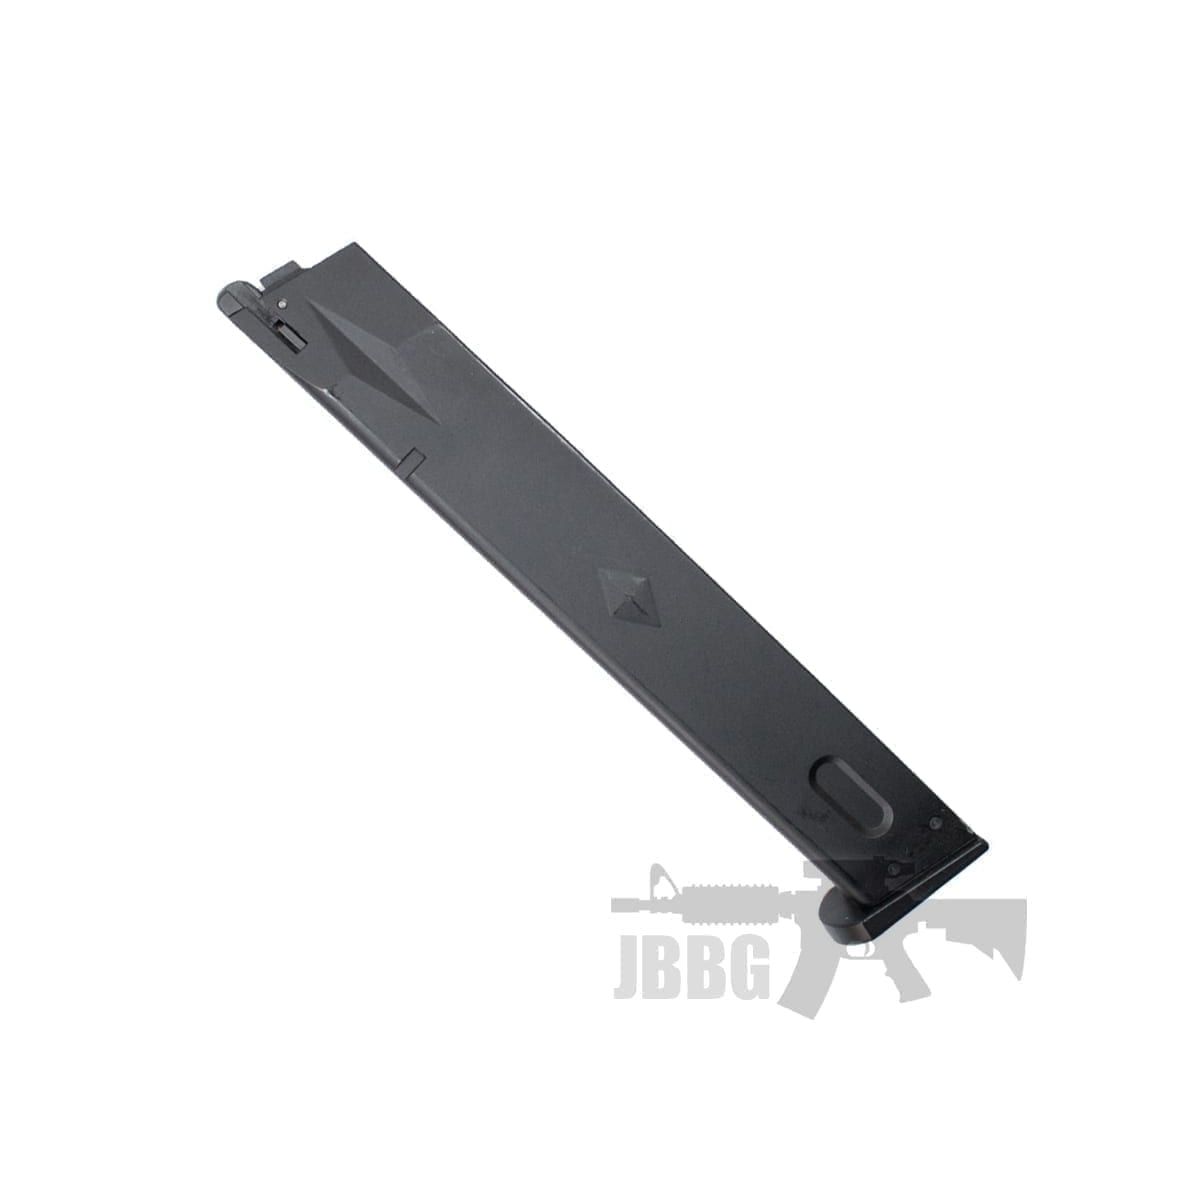 Airsoft WE 2pcs 50rd Extended Long Gas Magazine for AW Tokyo Marui M9 M92 GBB Bk